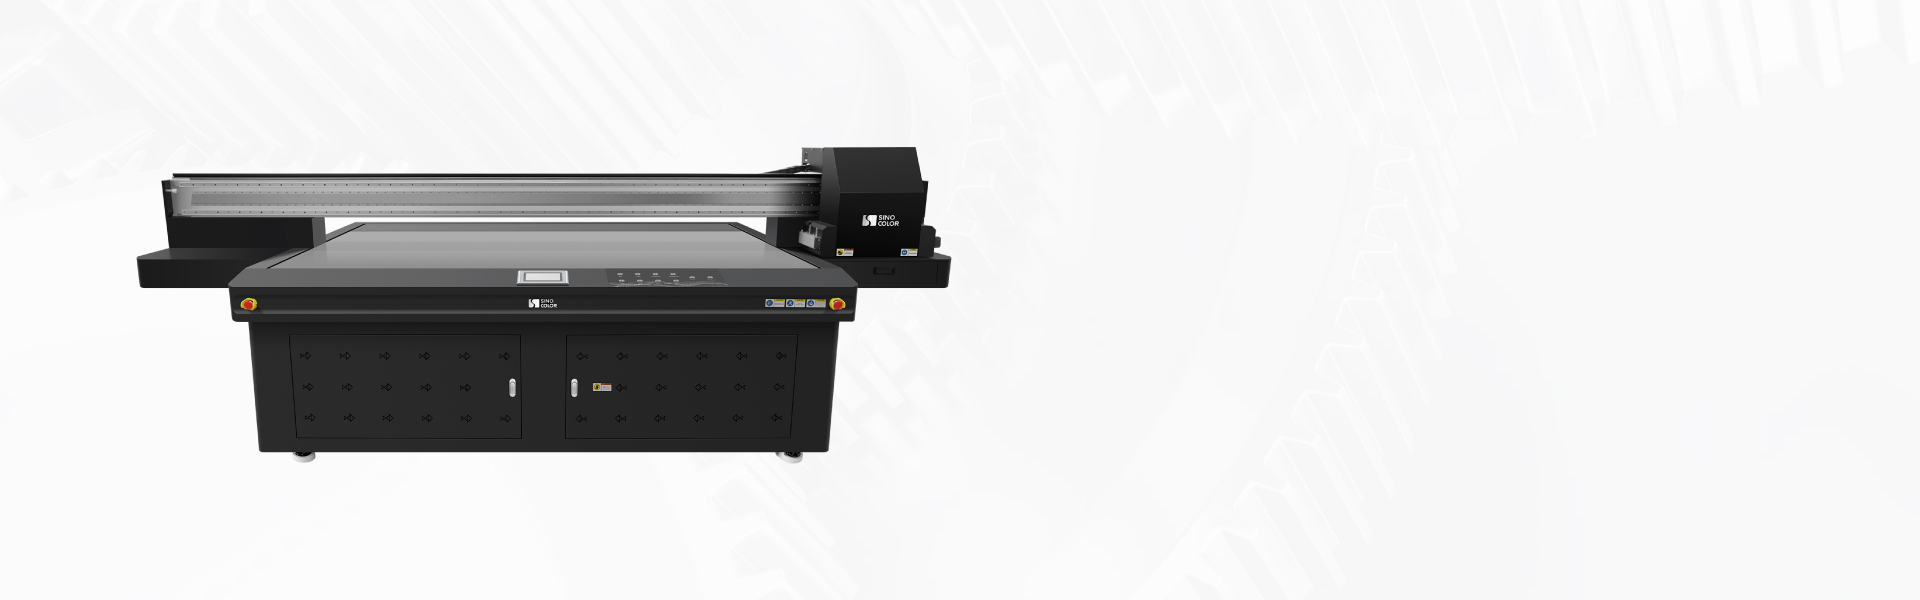 http://www.sinocolordg.com/products/uv-printer/uv-flatbed-printer/large-format-uv-flatbed-printer-fb-2513s.html images